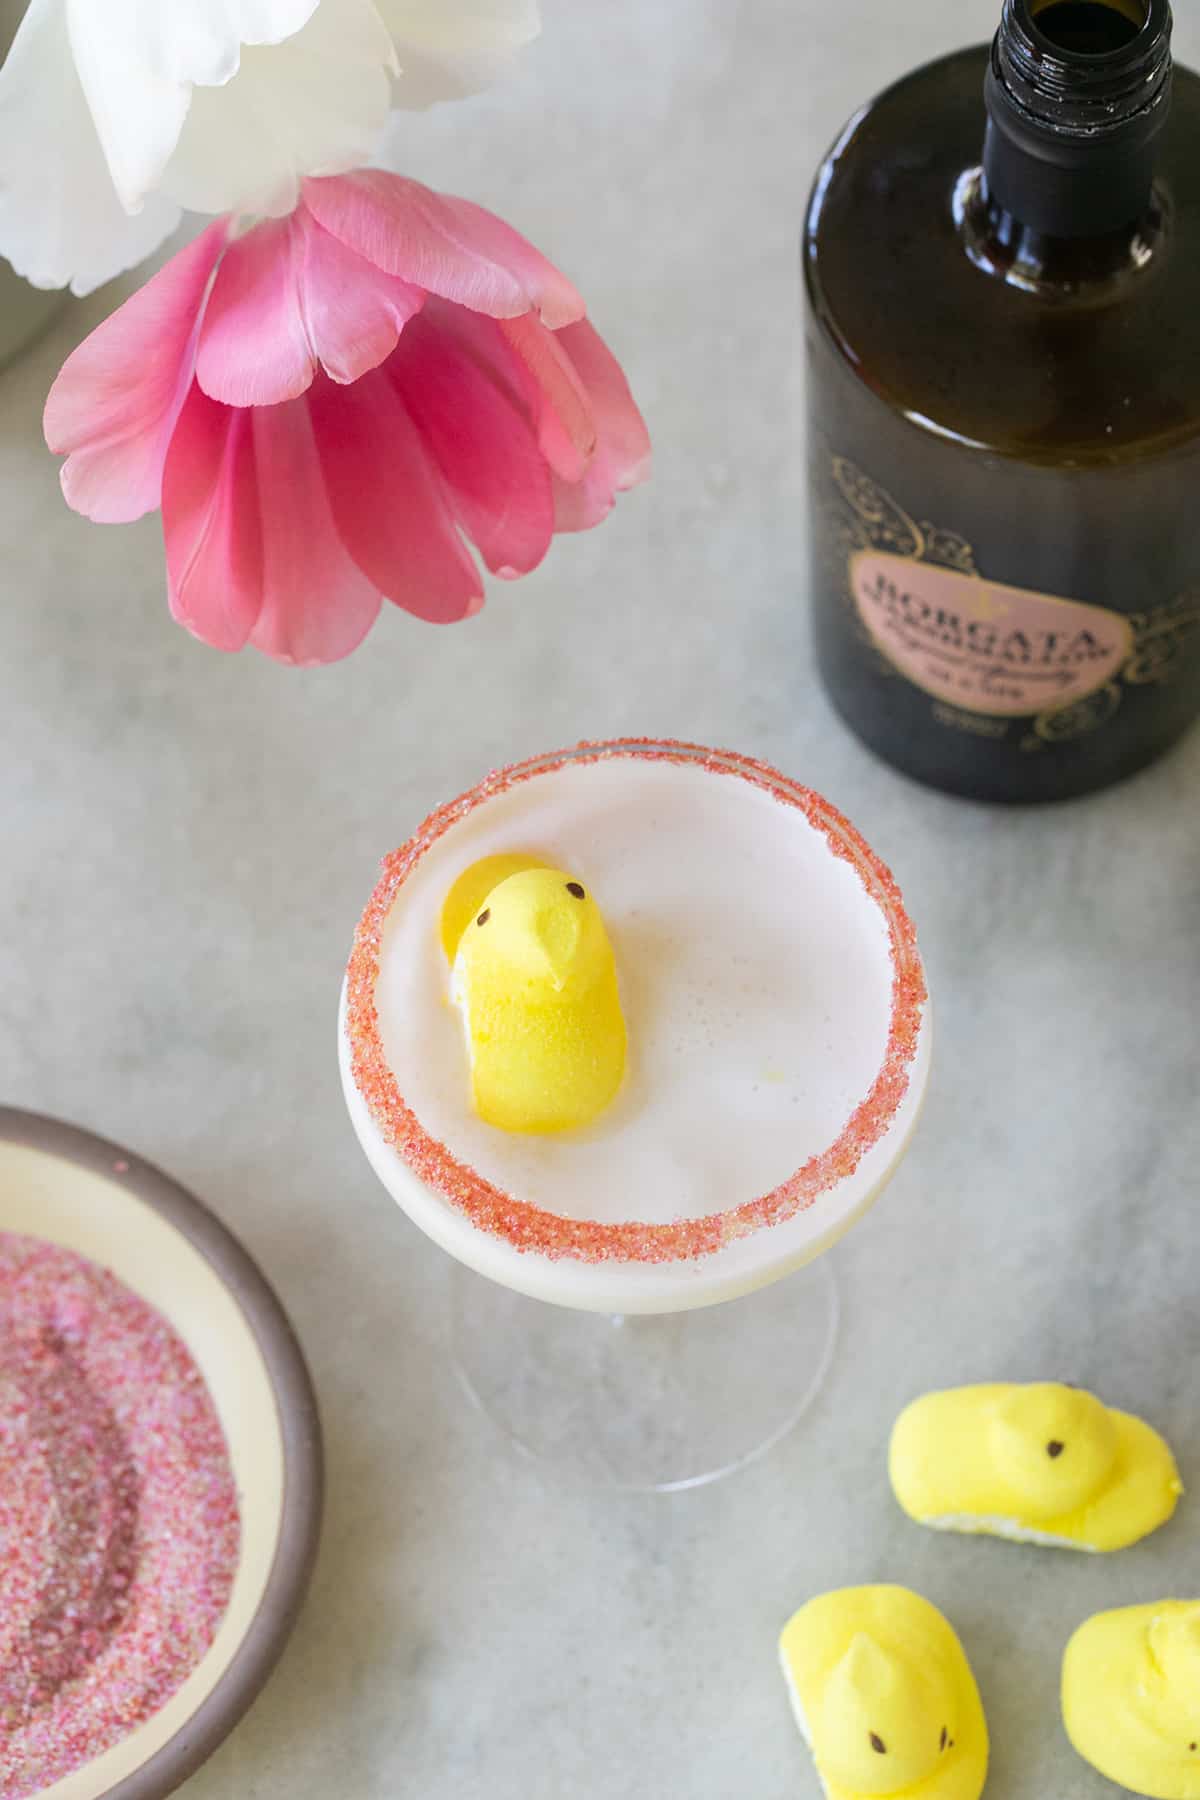 Peep marshmallow martini with pink sugar and a yellow peep garnished on the top.